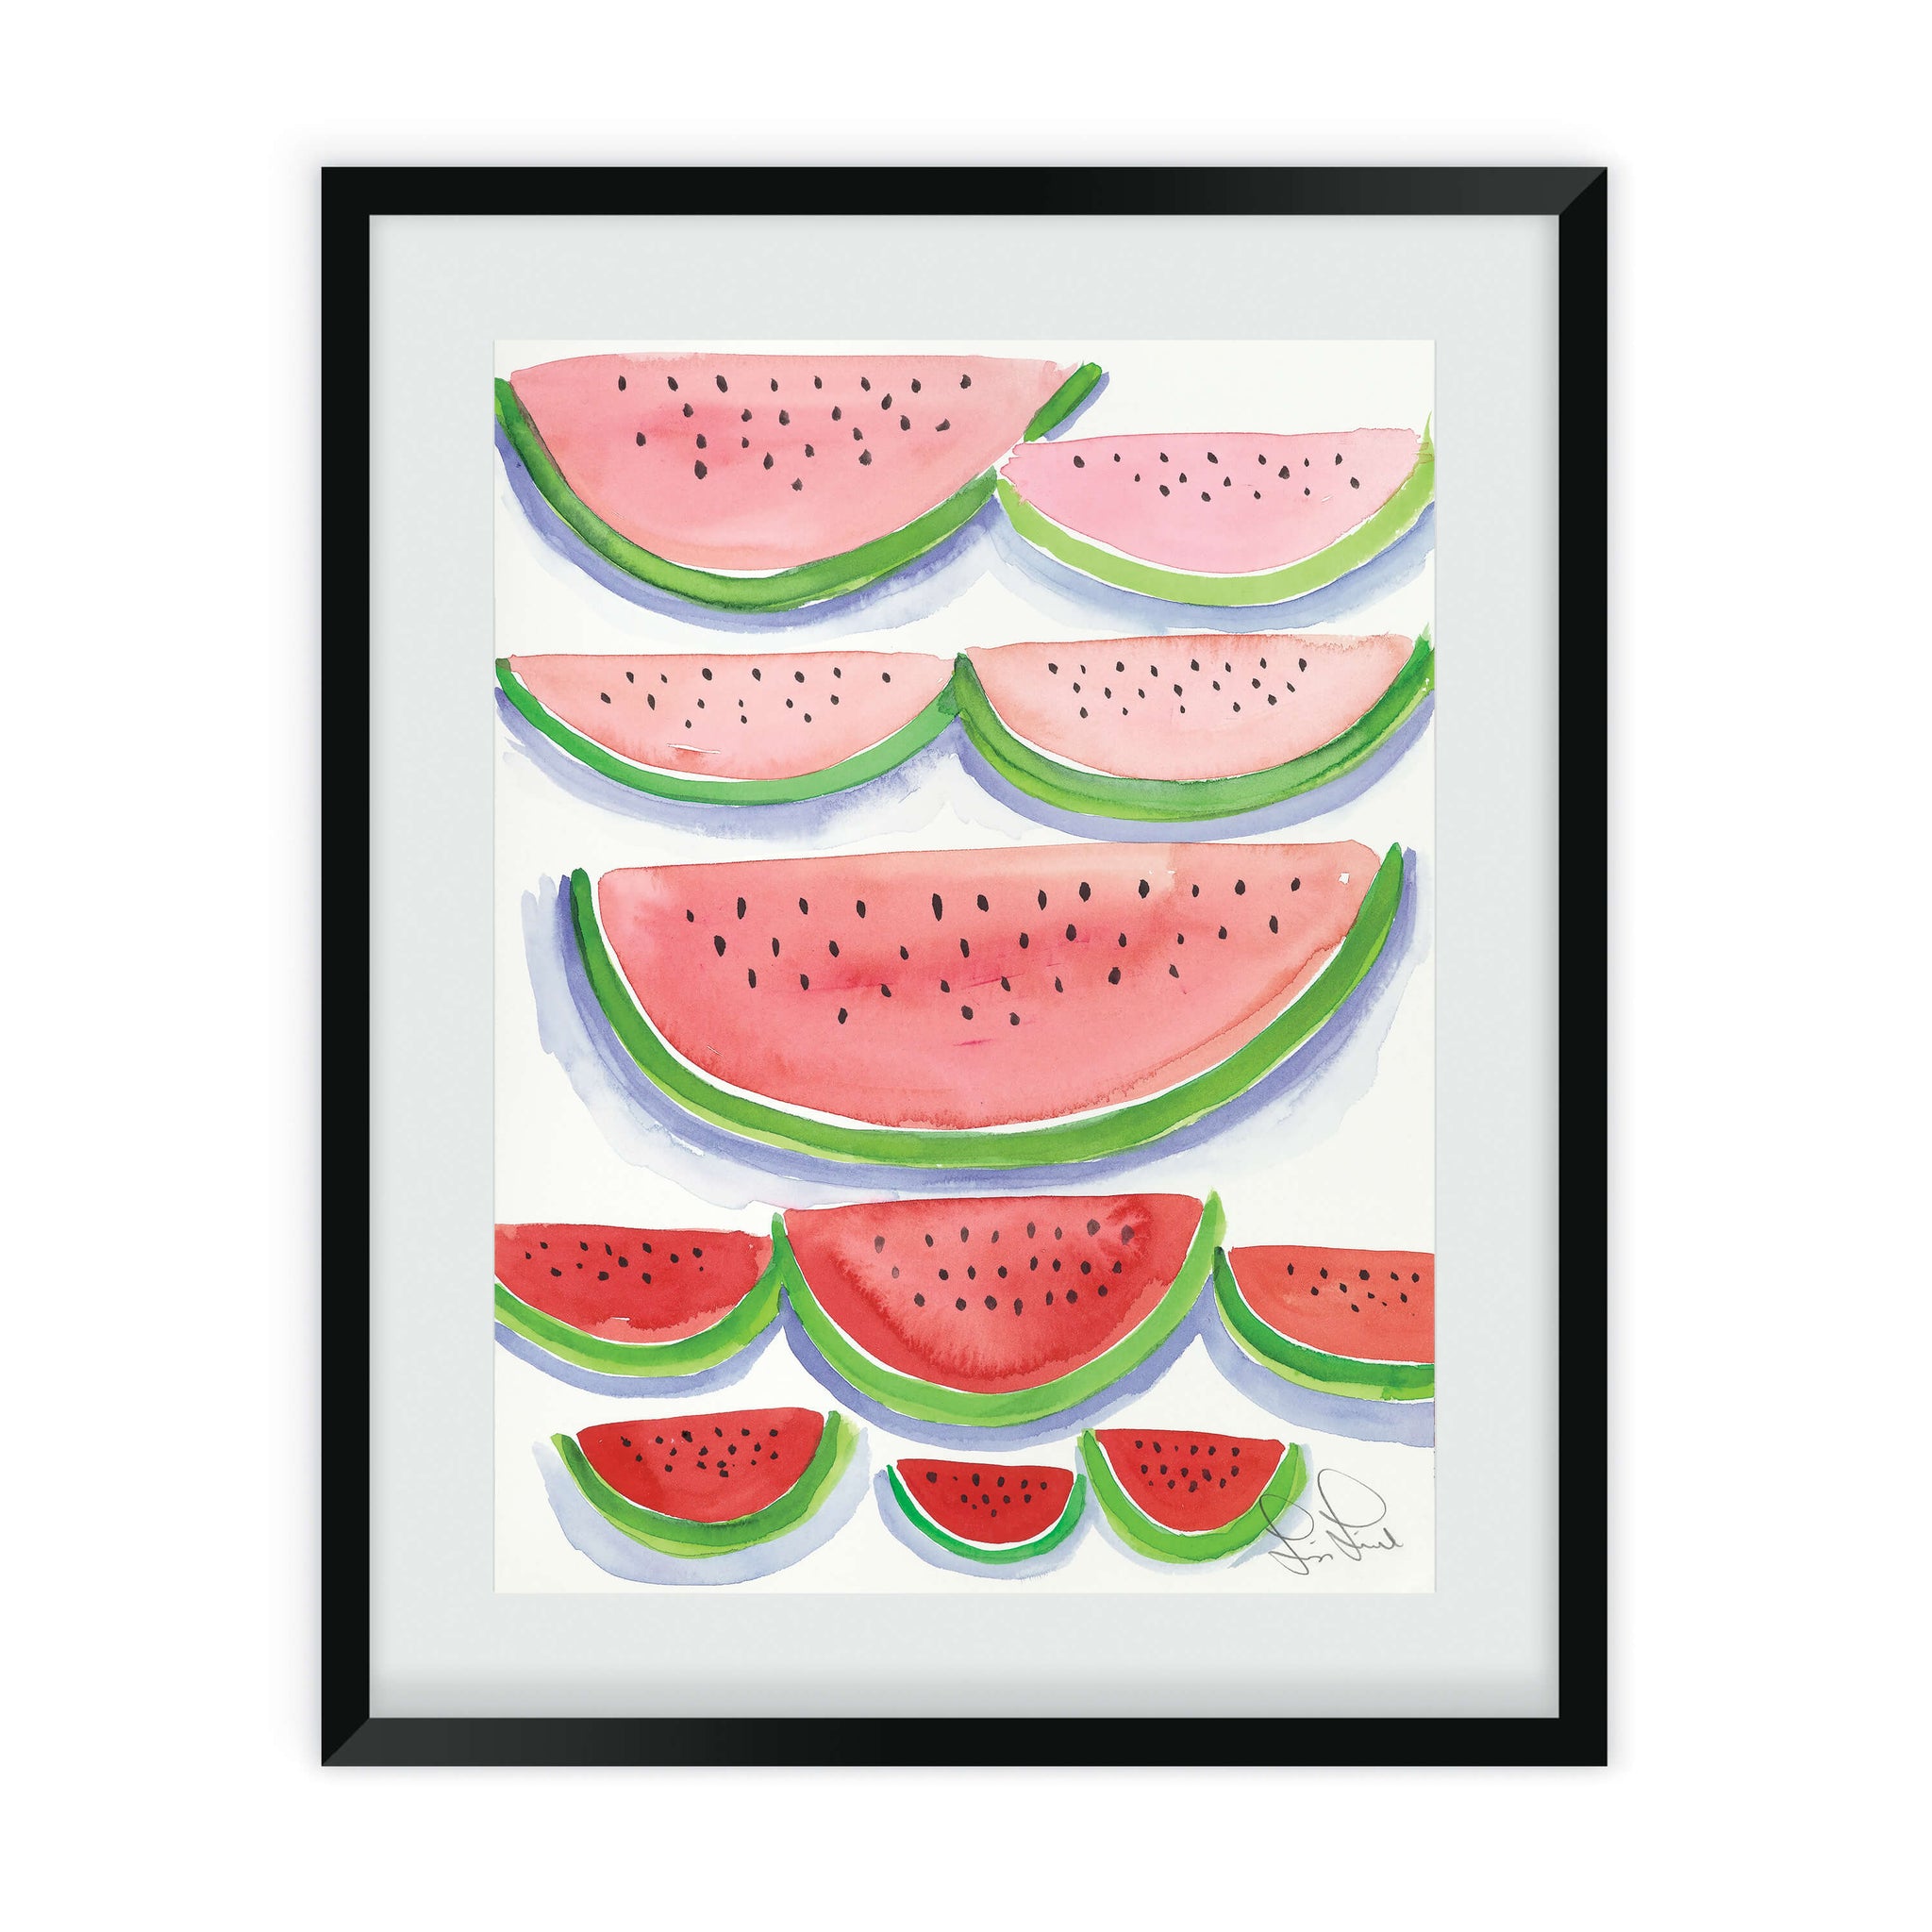 Maine Cottage Watermelons by Liz Lind for Maine Cottage® 